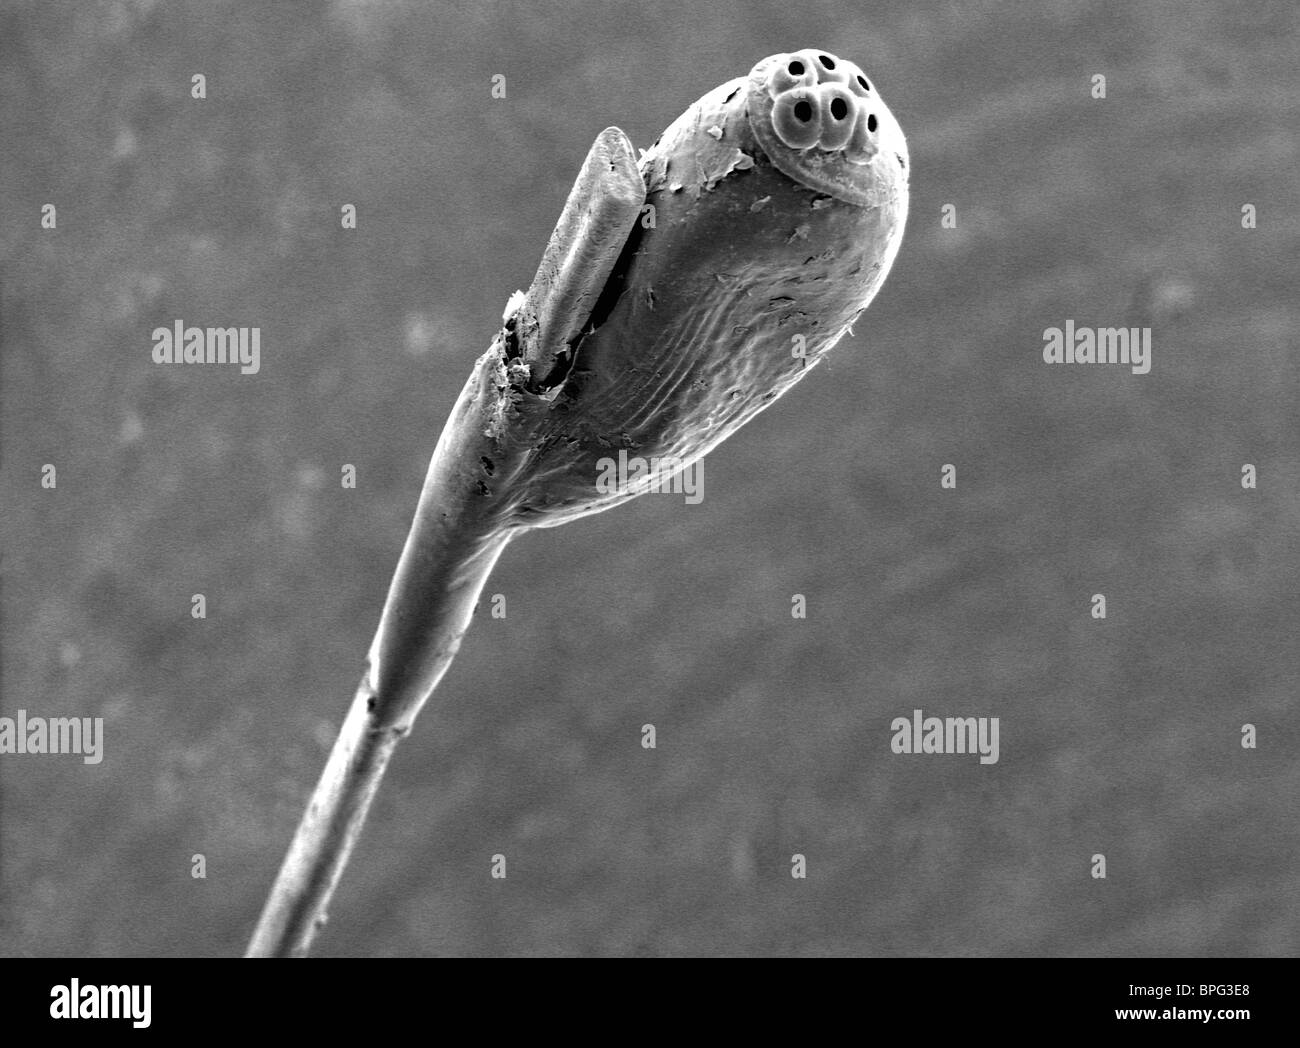 A scanning electron micrograph (SEM) of a head louse egg on a hair shaft  Stock Photo - Alamy